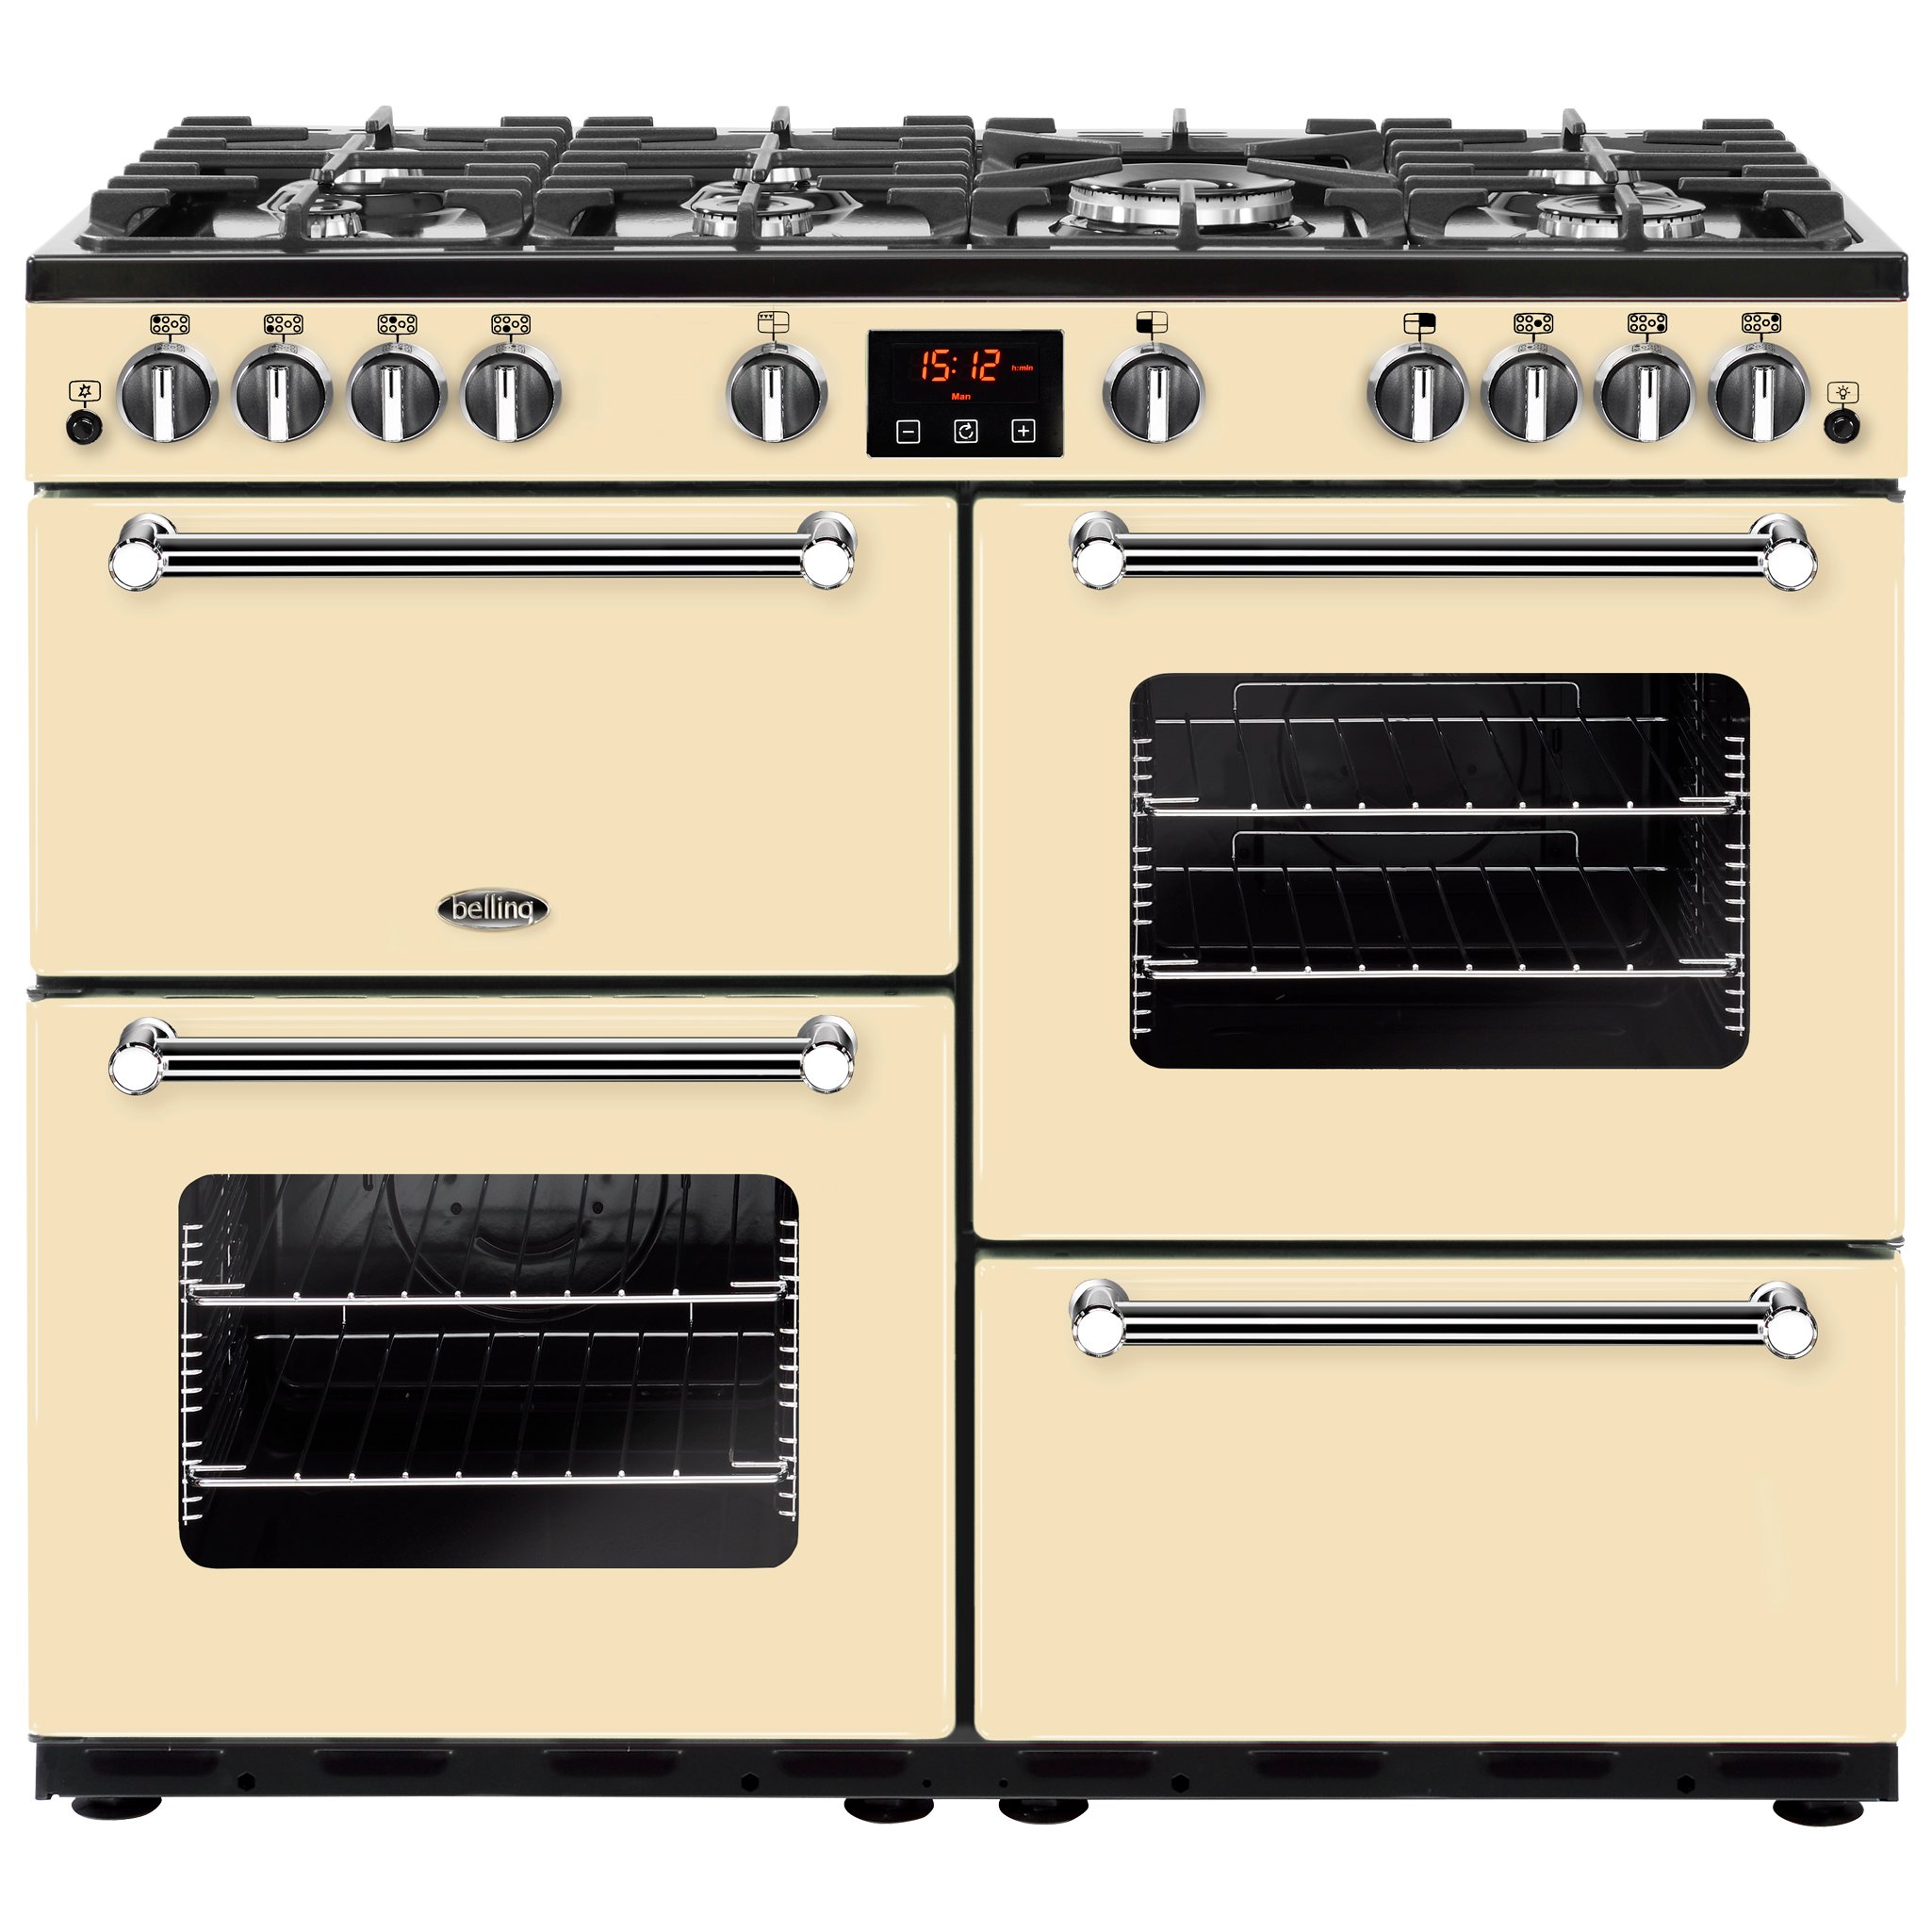 100cm gas range cooker with 7 burner gas hob, 4kW Powerwok, Cast Iron Pansure Supports, Minute Minder and easy clean enamel.